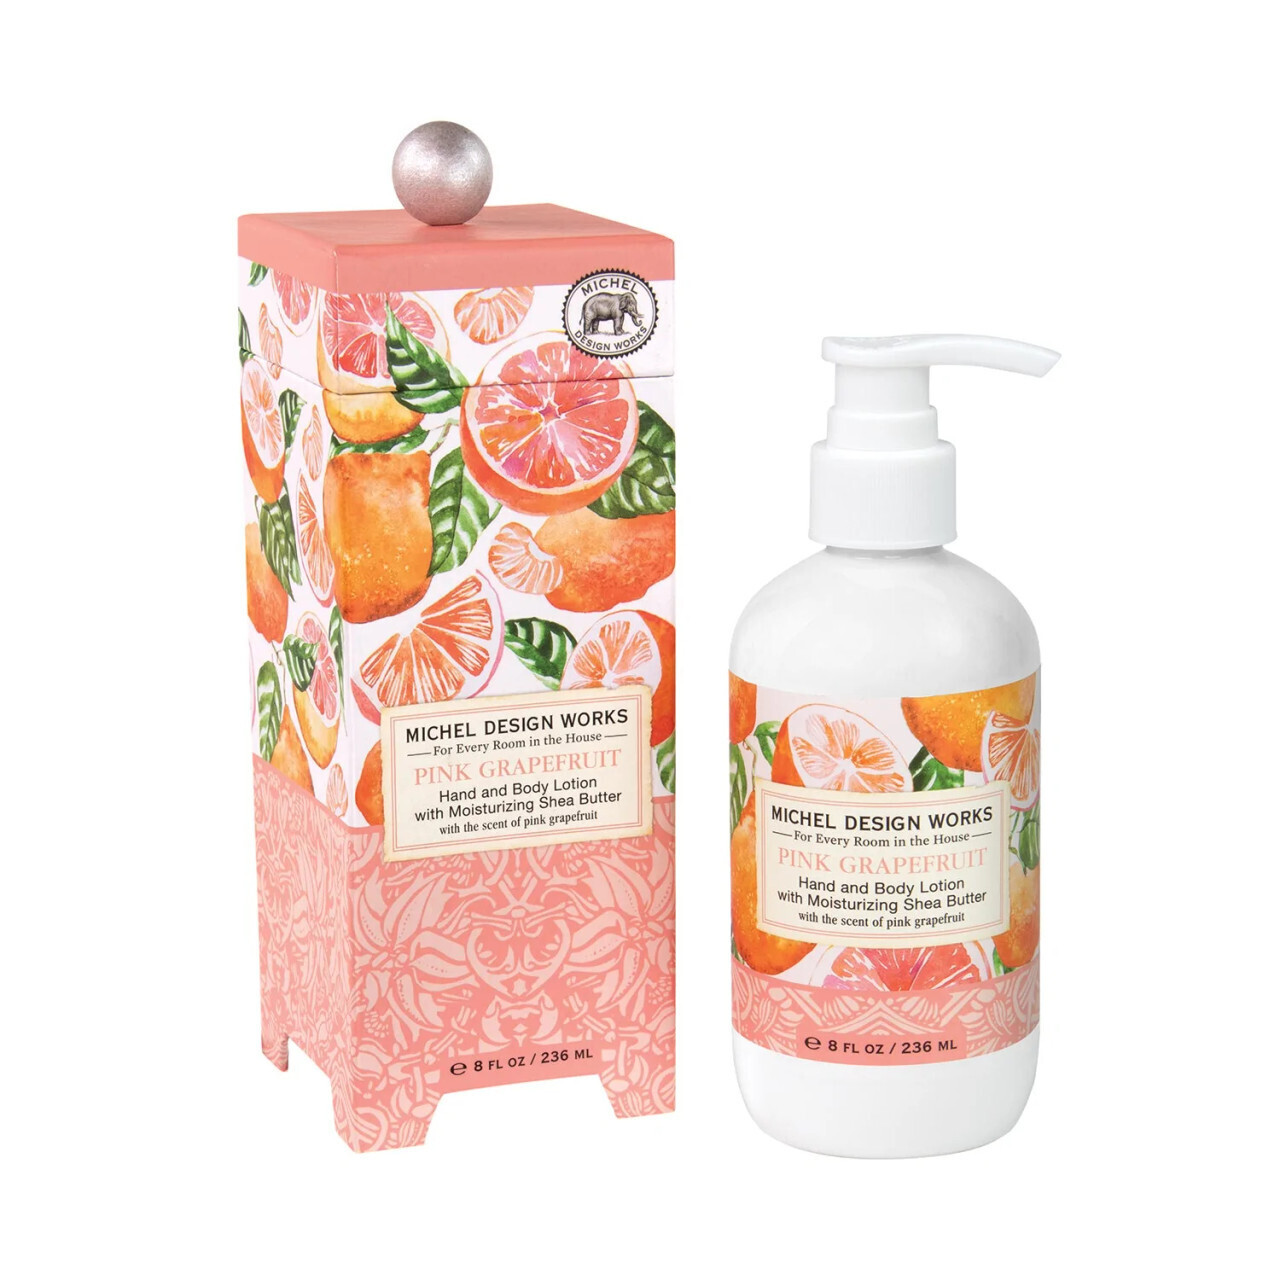 Lotion - Pink Grapefruit - Hand and Body - 8 Oz.